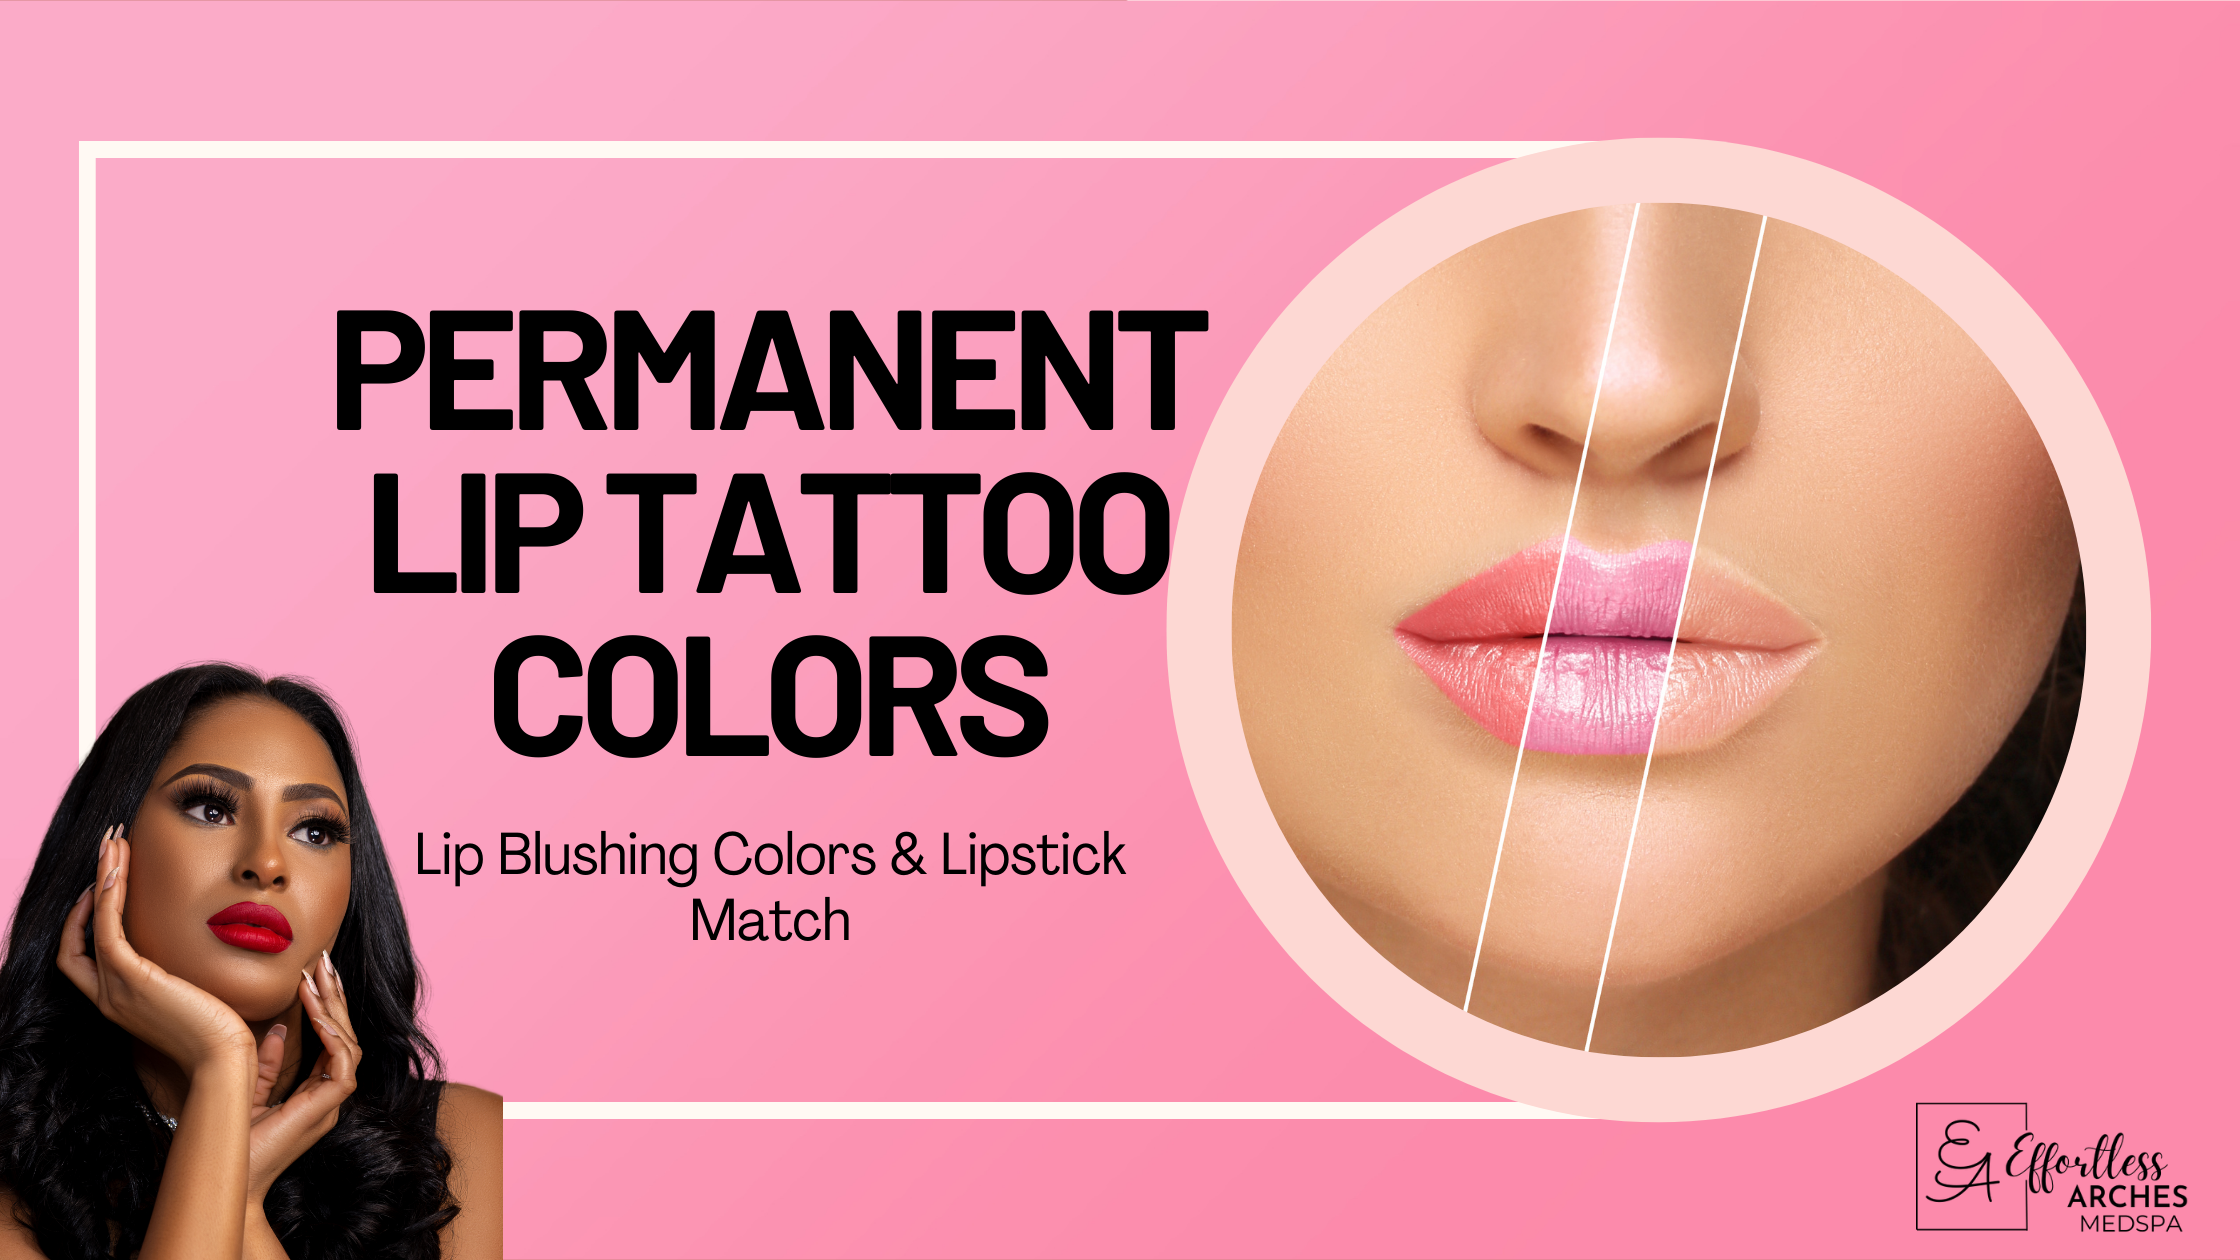 LIP TATTOOING – Skincare Laser Clinic